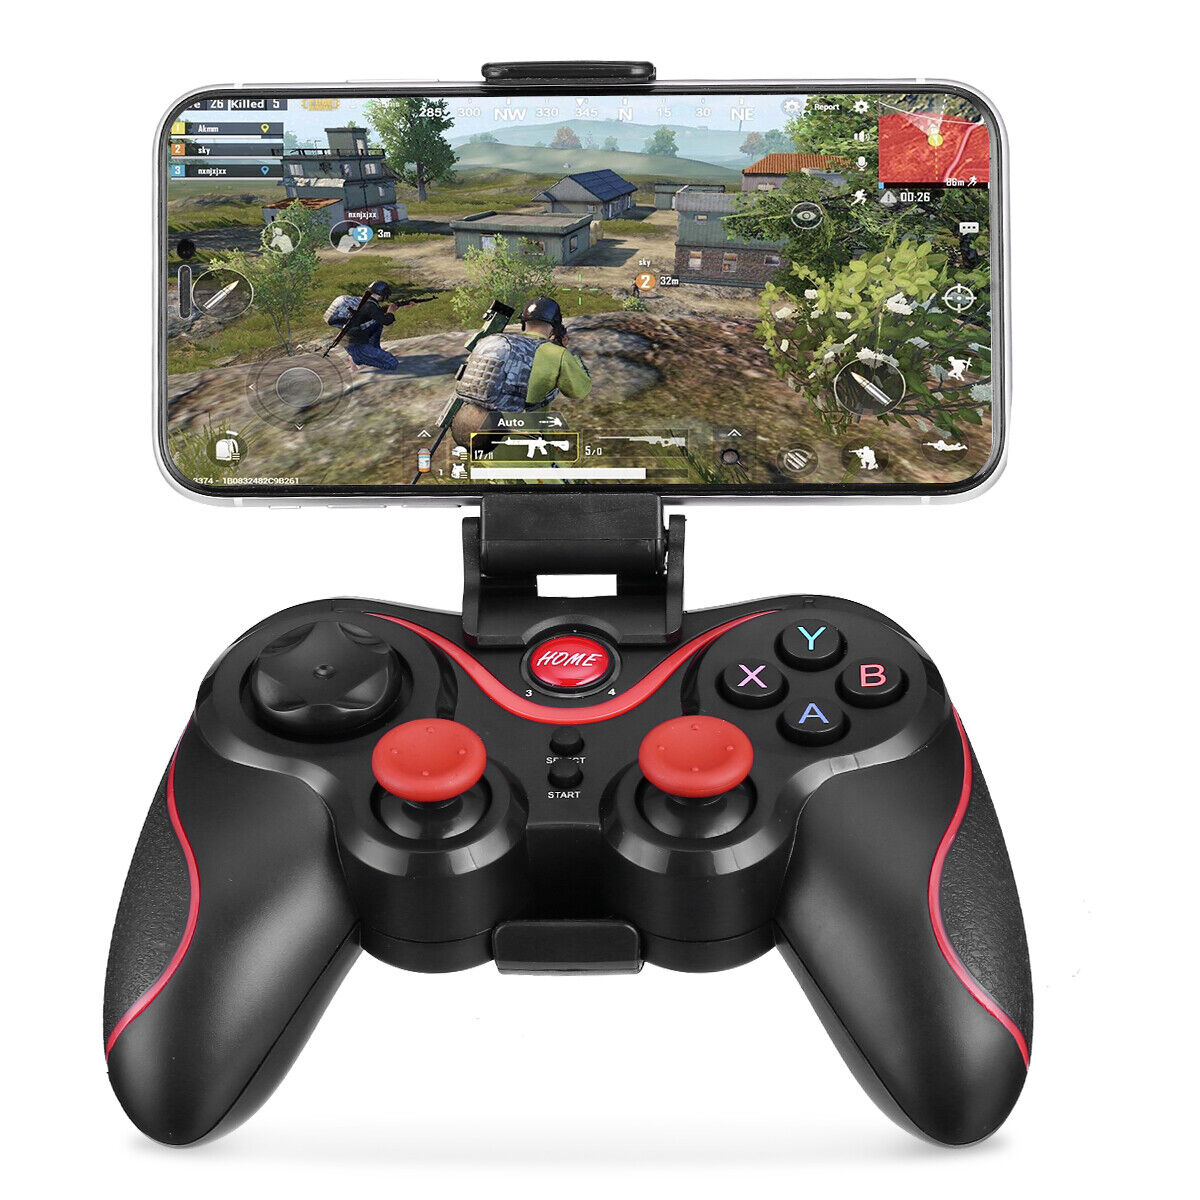 Wireless Bluetooth Game Controller Gamepad for iOS Android Tablet PC Cellphone Unbranded Does Not Apply